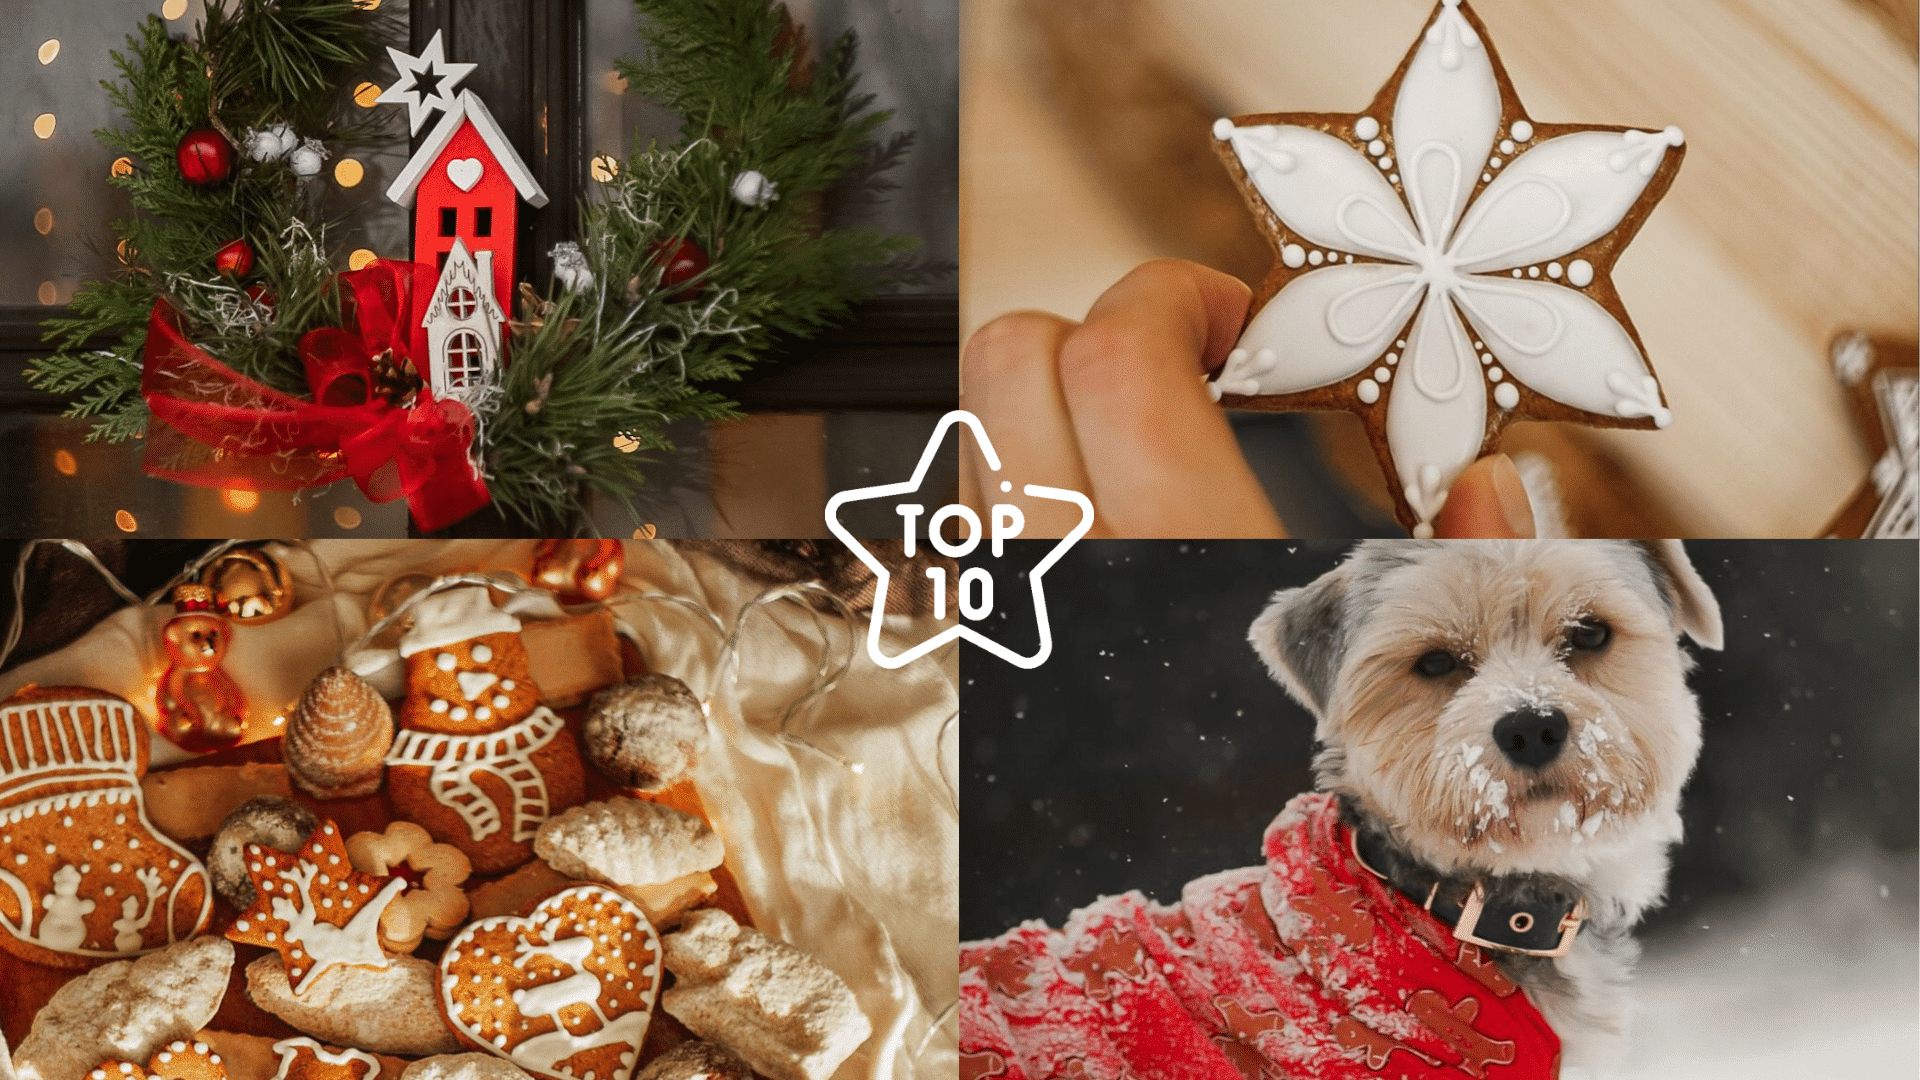 TOP 10 Photos from Our Readers - Theme Holiday Tidbits